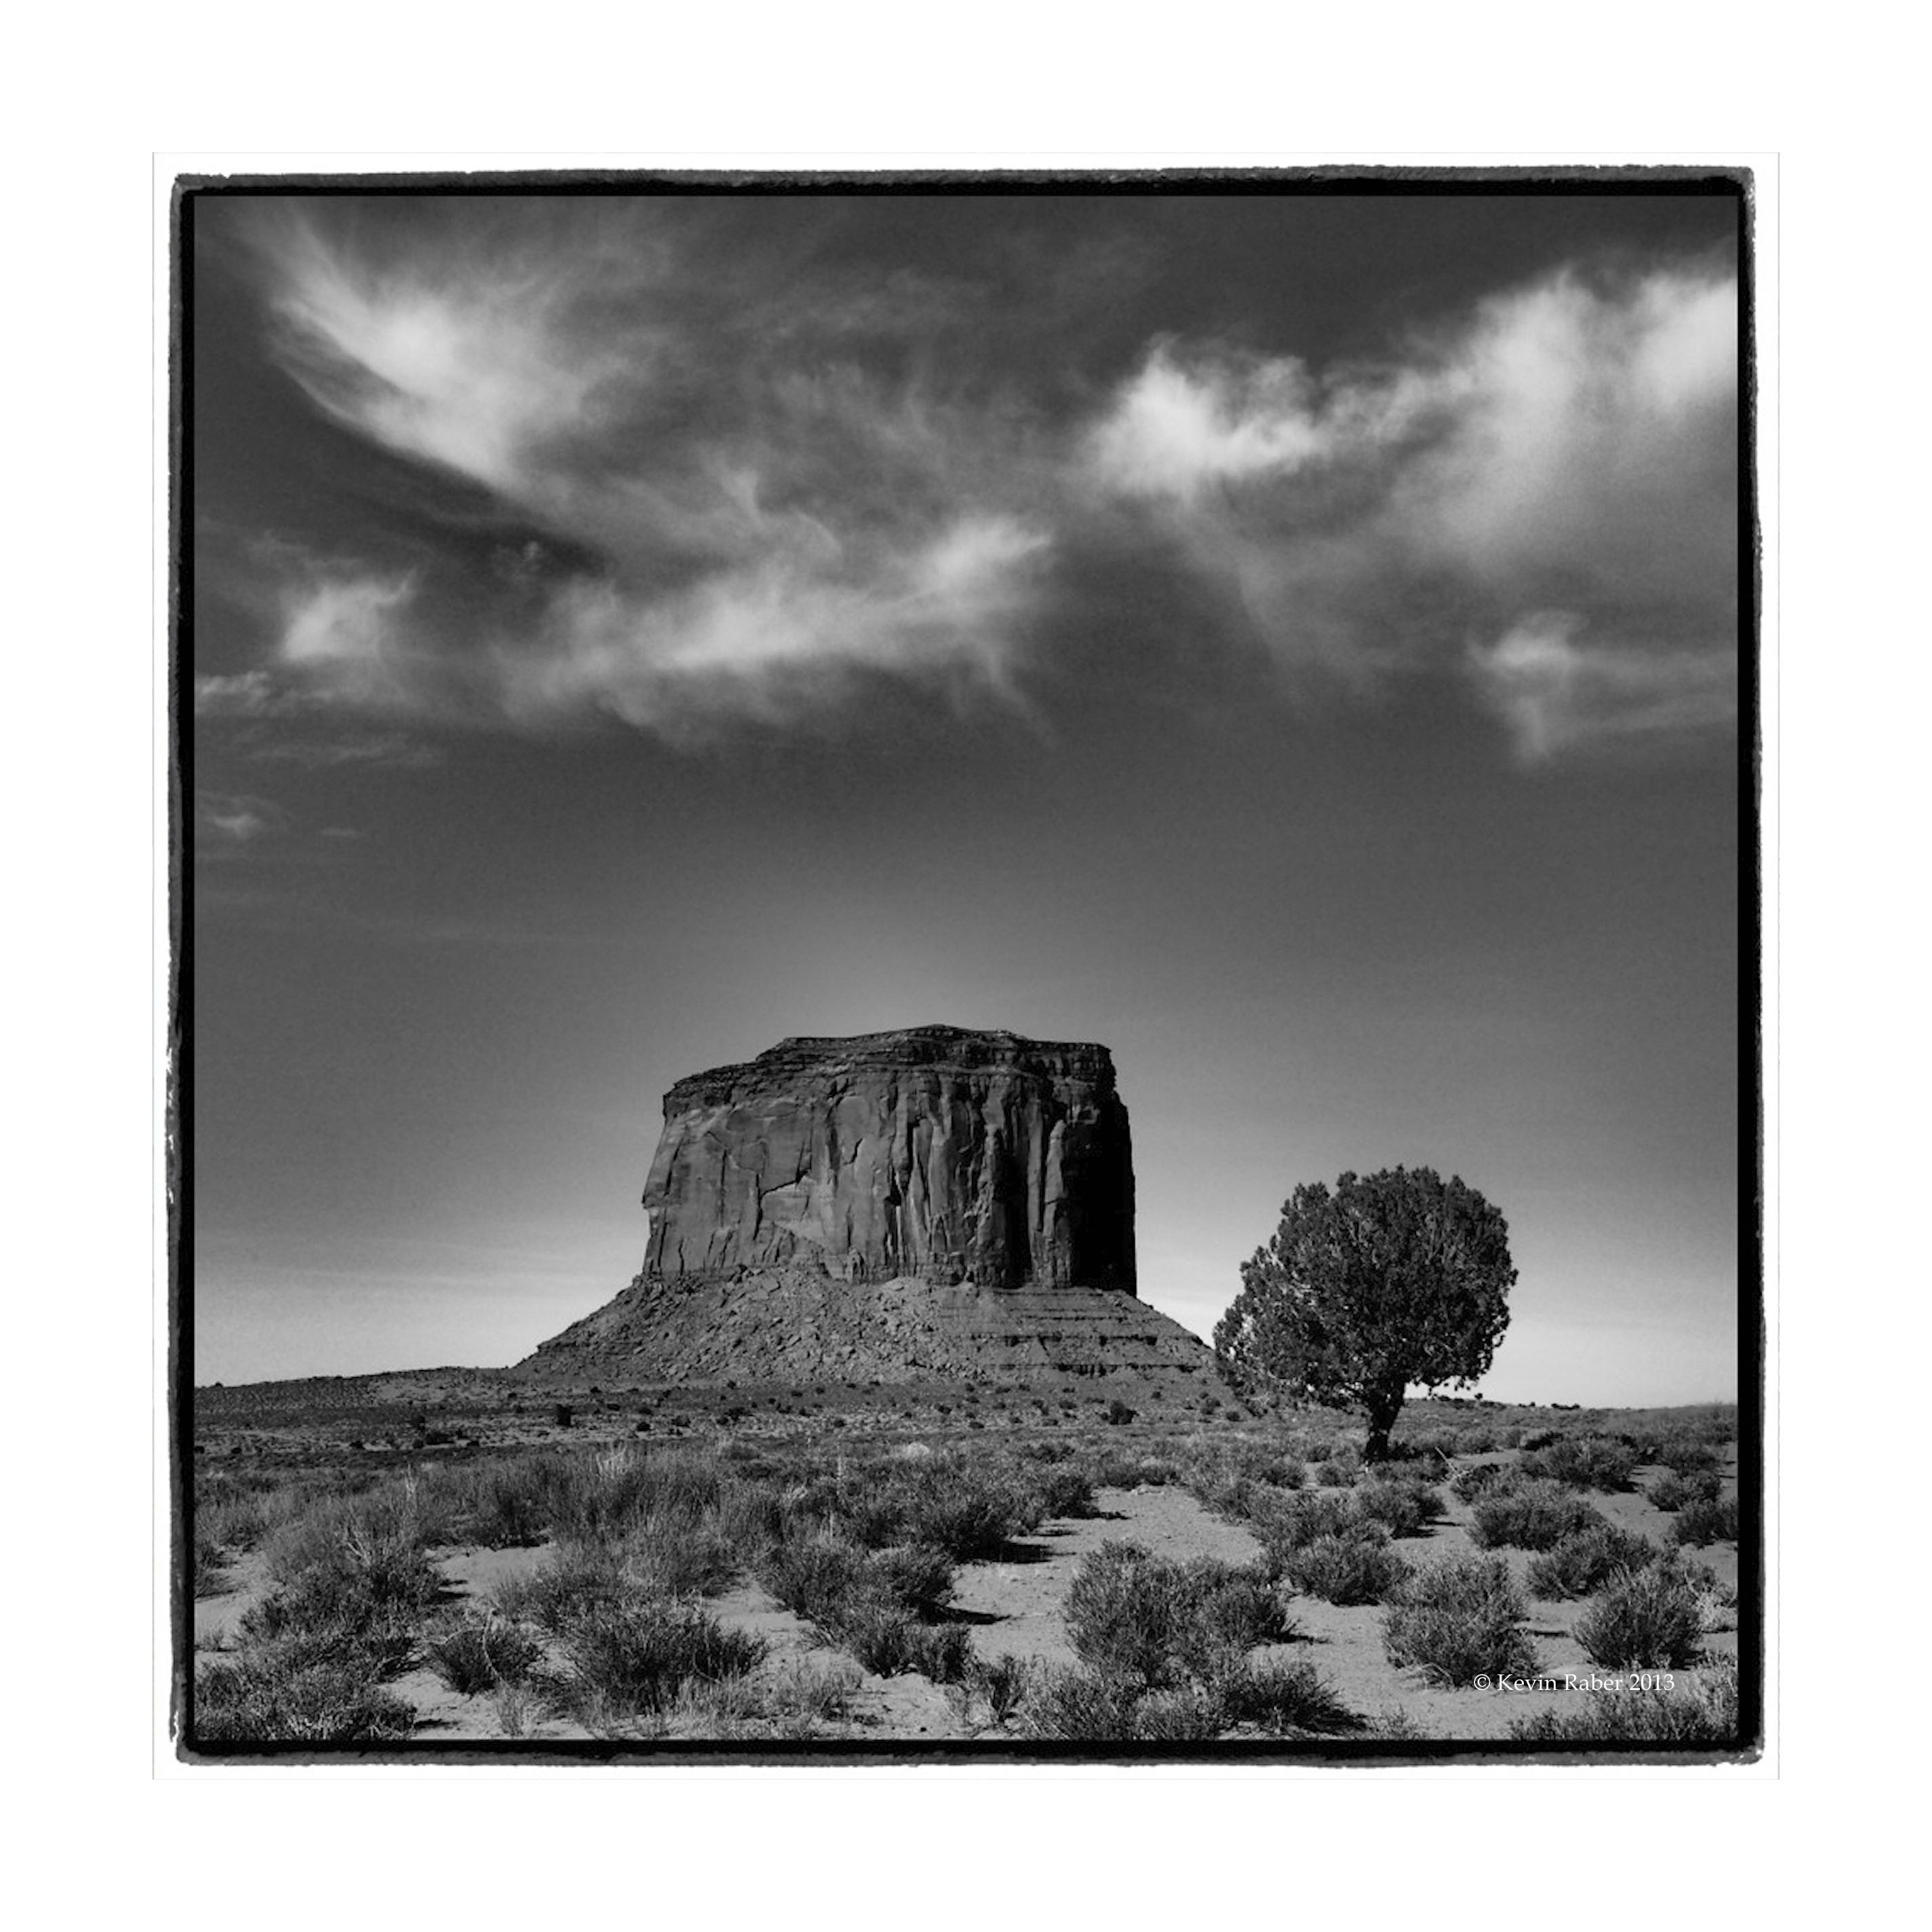 Another Monument Valley Image